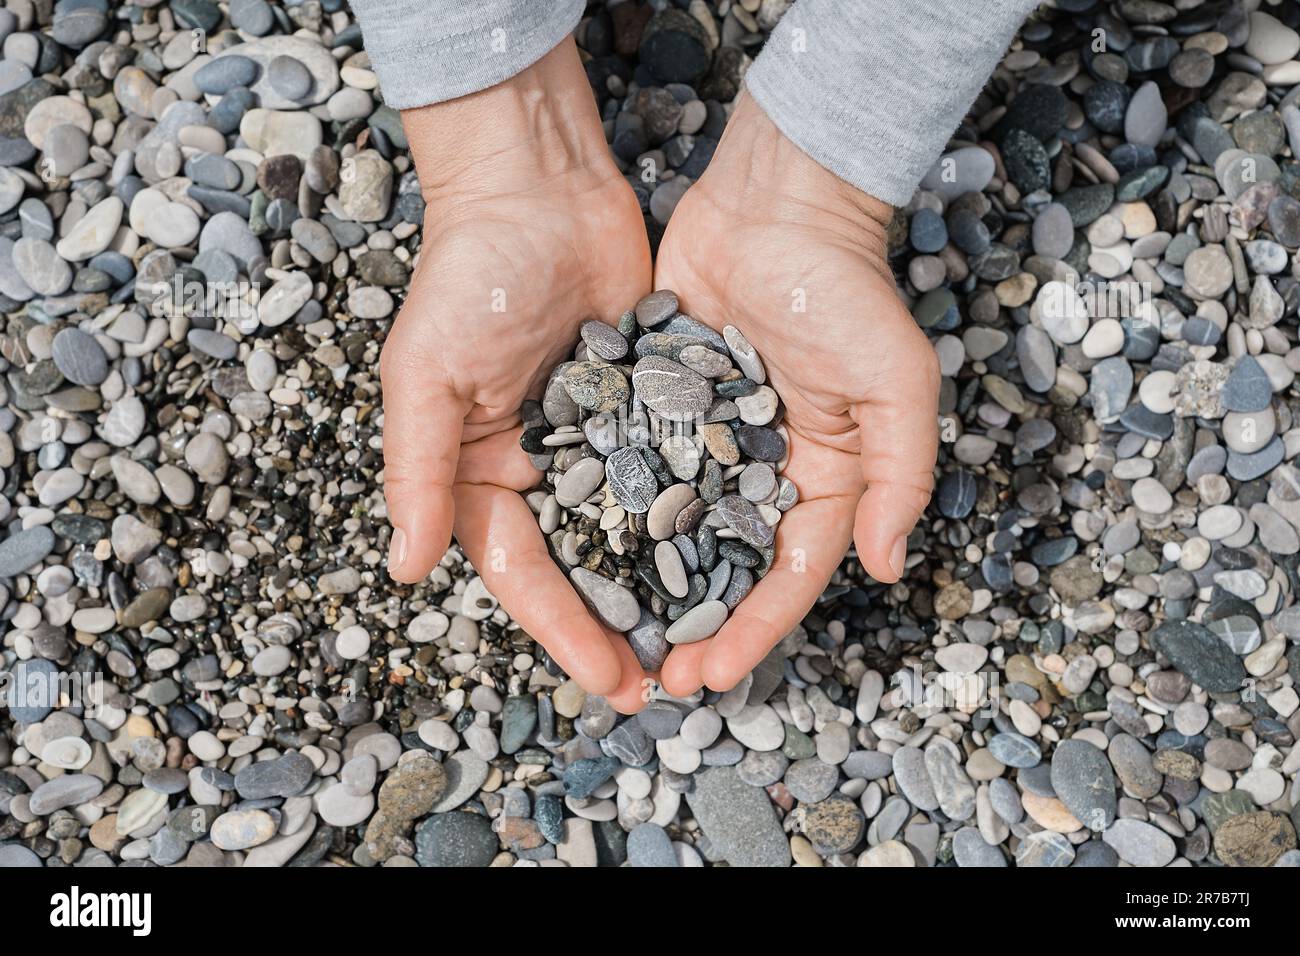 Women's hands with sea pebbles. Pebble sea beach close up, dark round pebbles and gray dry pebbles, high quality photo idea for screen Stock Photo